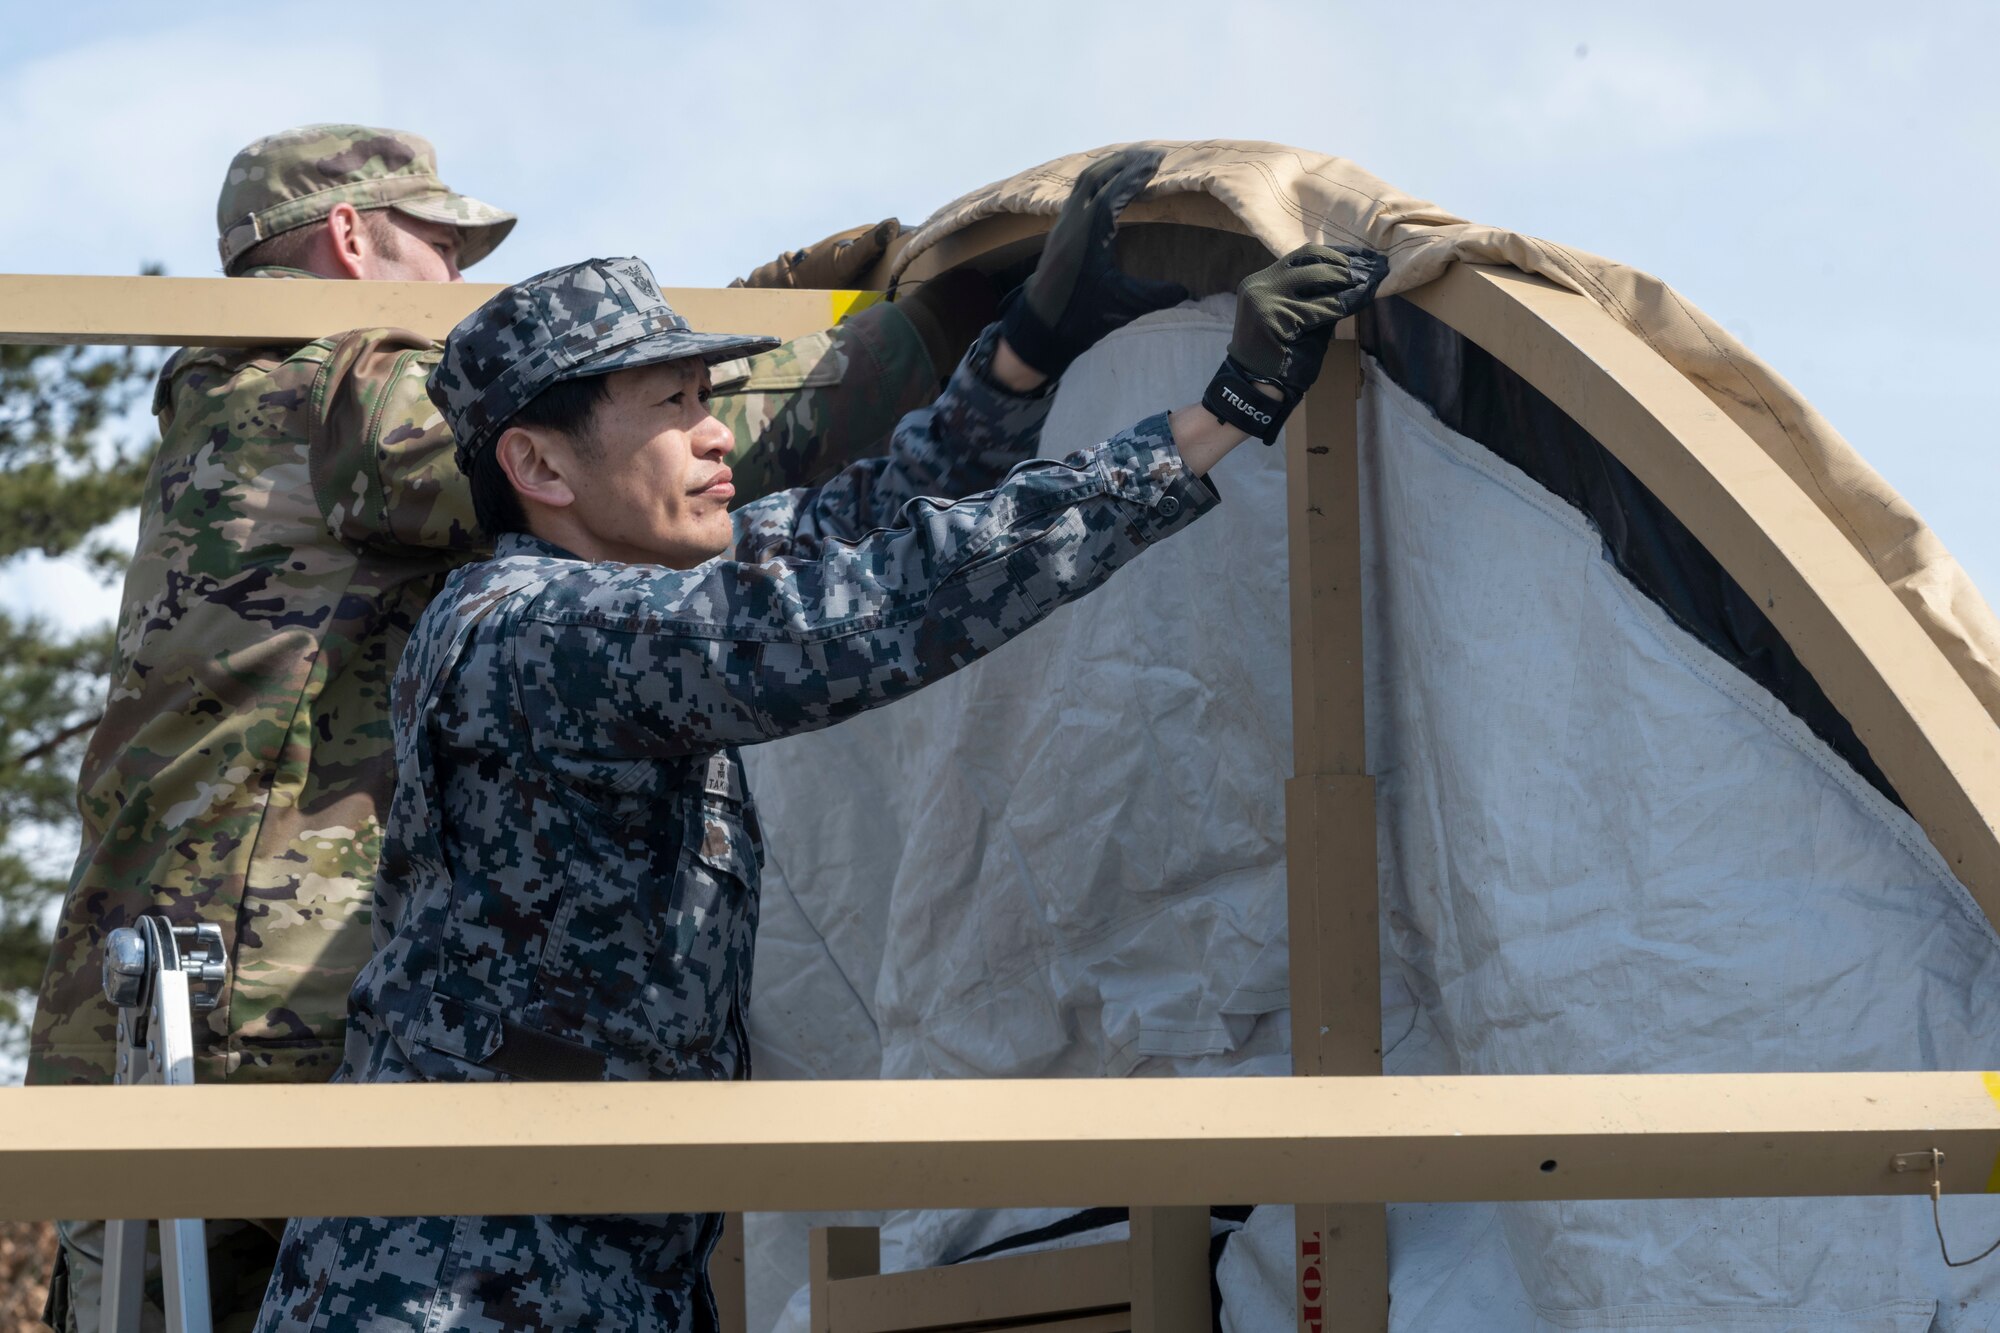 A Japan Air Self-Defense Force (JASDF) Airman and a U.S. Air Force Airman assemble a Small Shelter System during the capstone event of a Multi-Capable Airman course at Misawa Air Base, Japan, March 8, 2024.